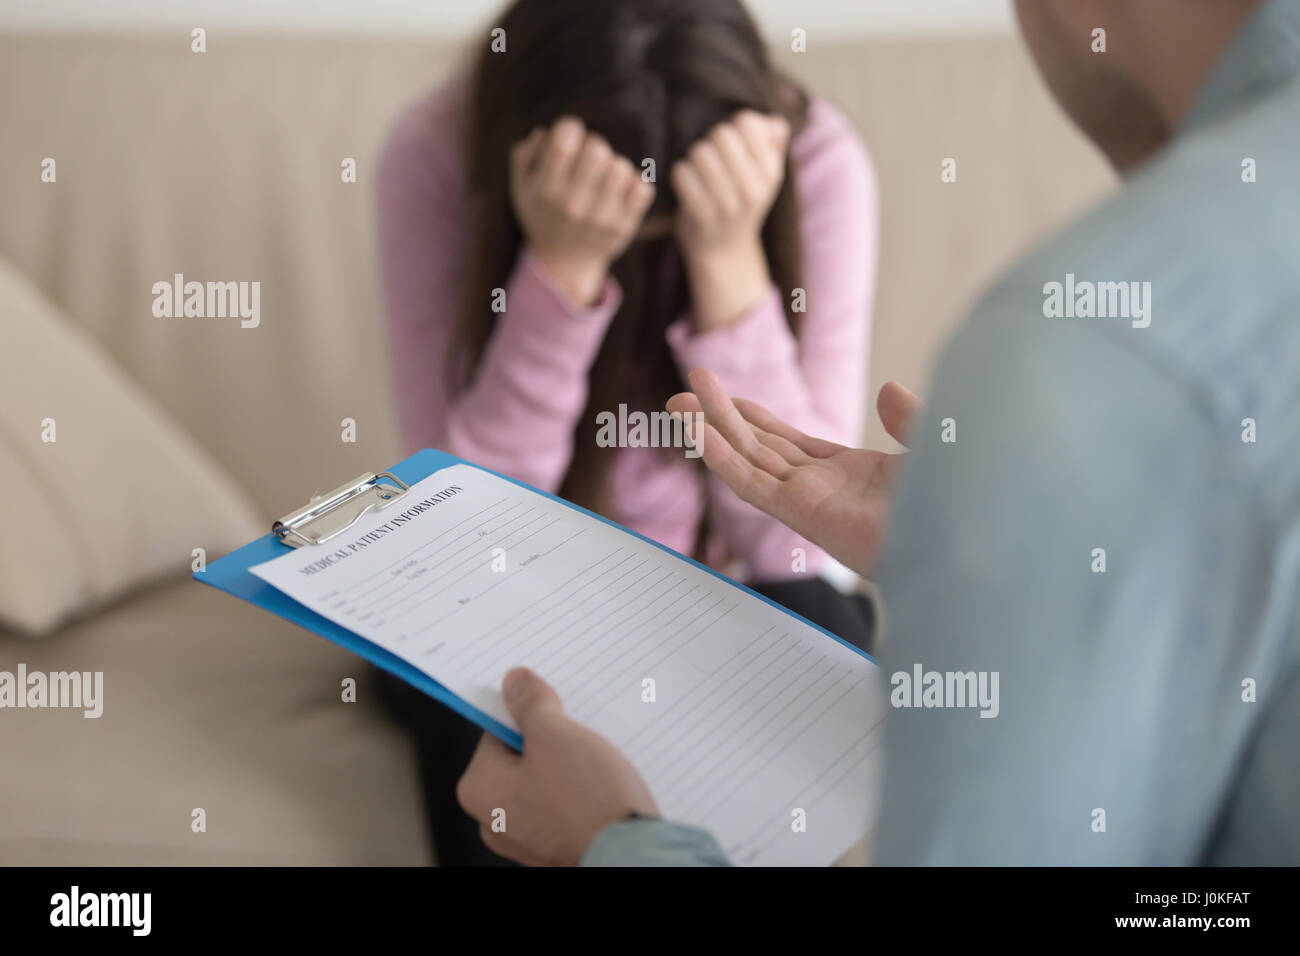 Psychologist start working with depressed female patient, holdin Stock Photo